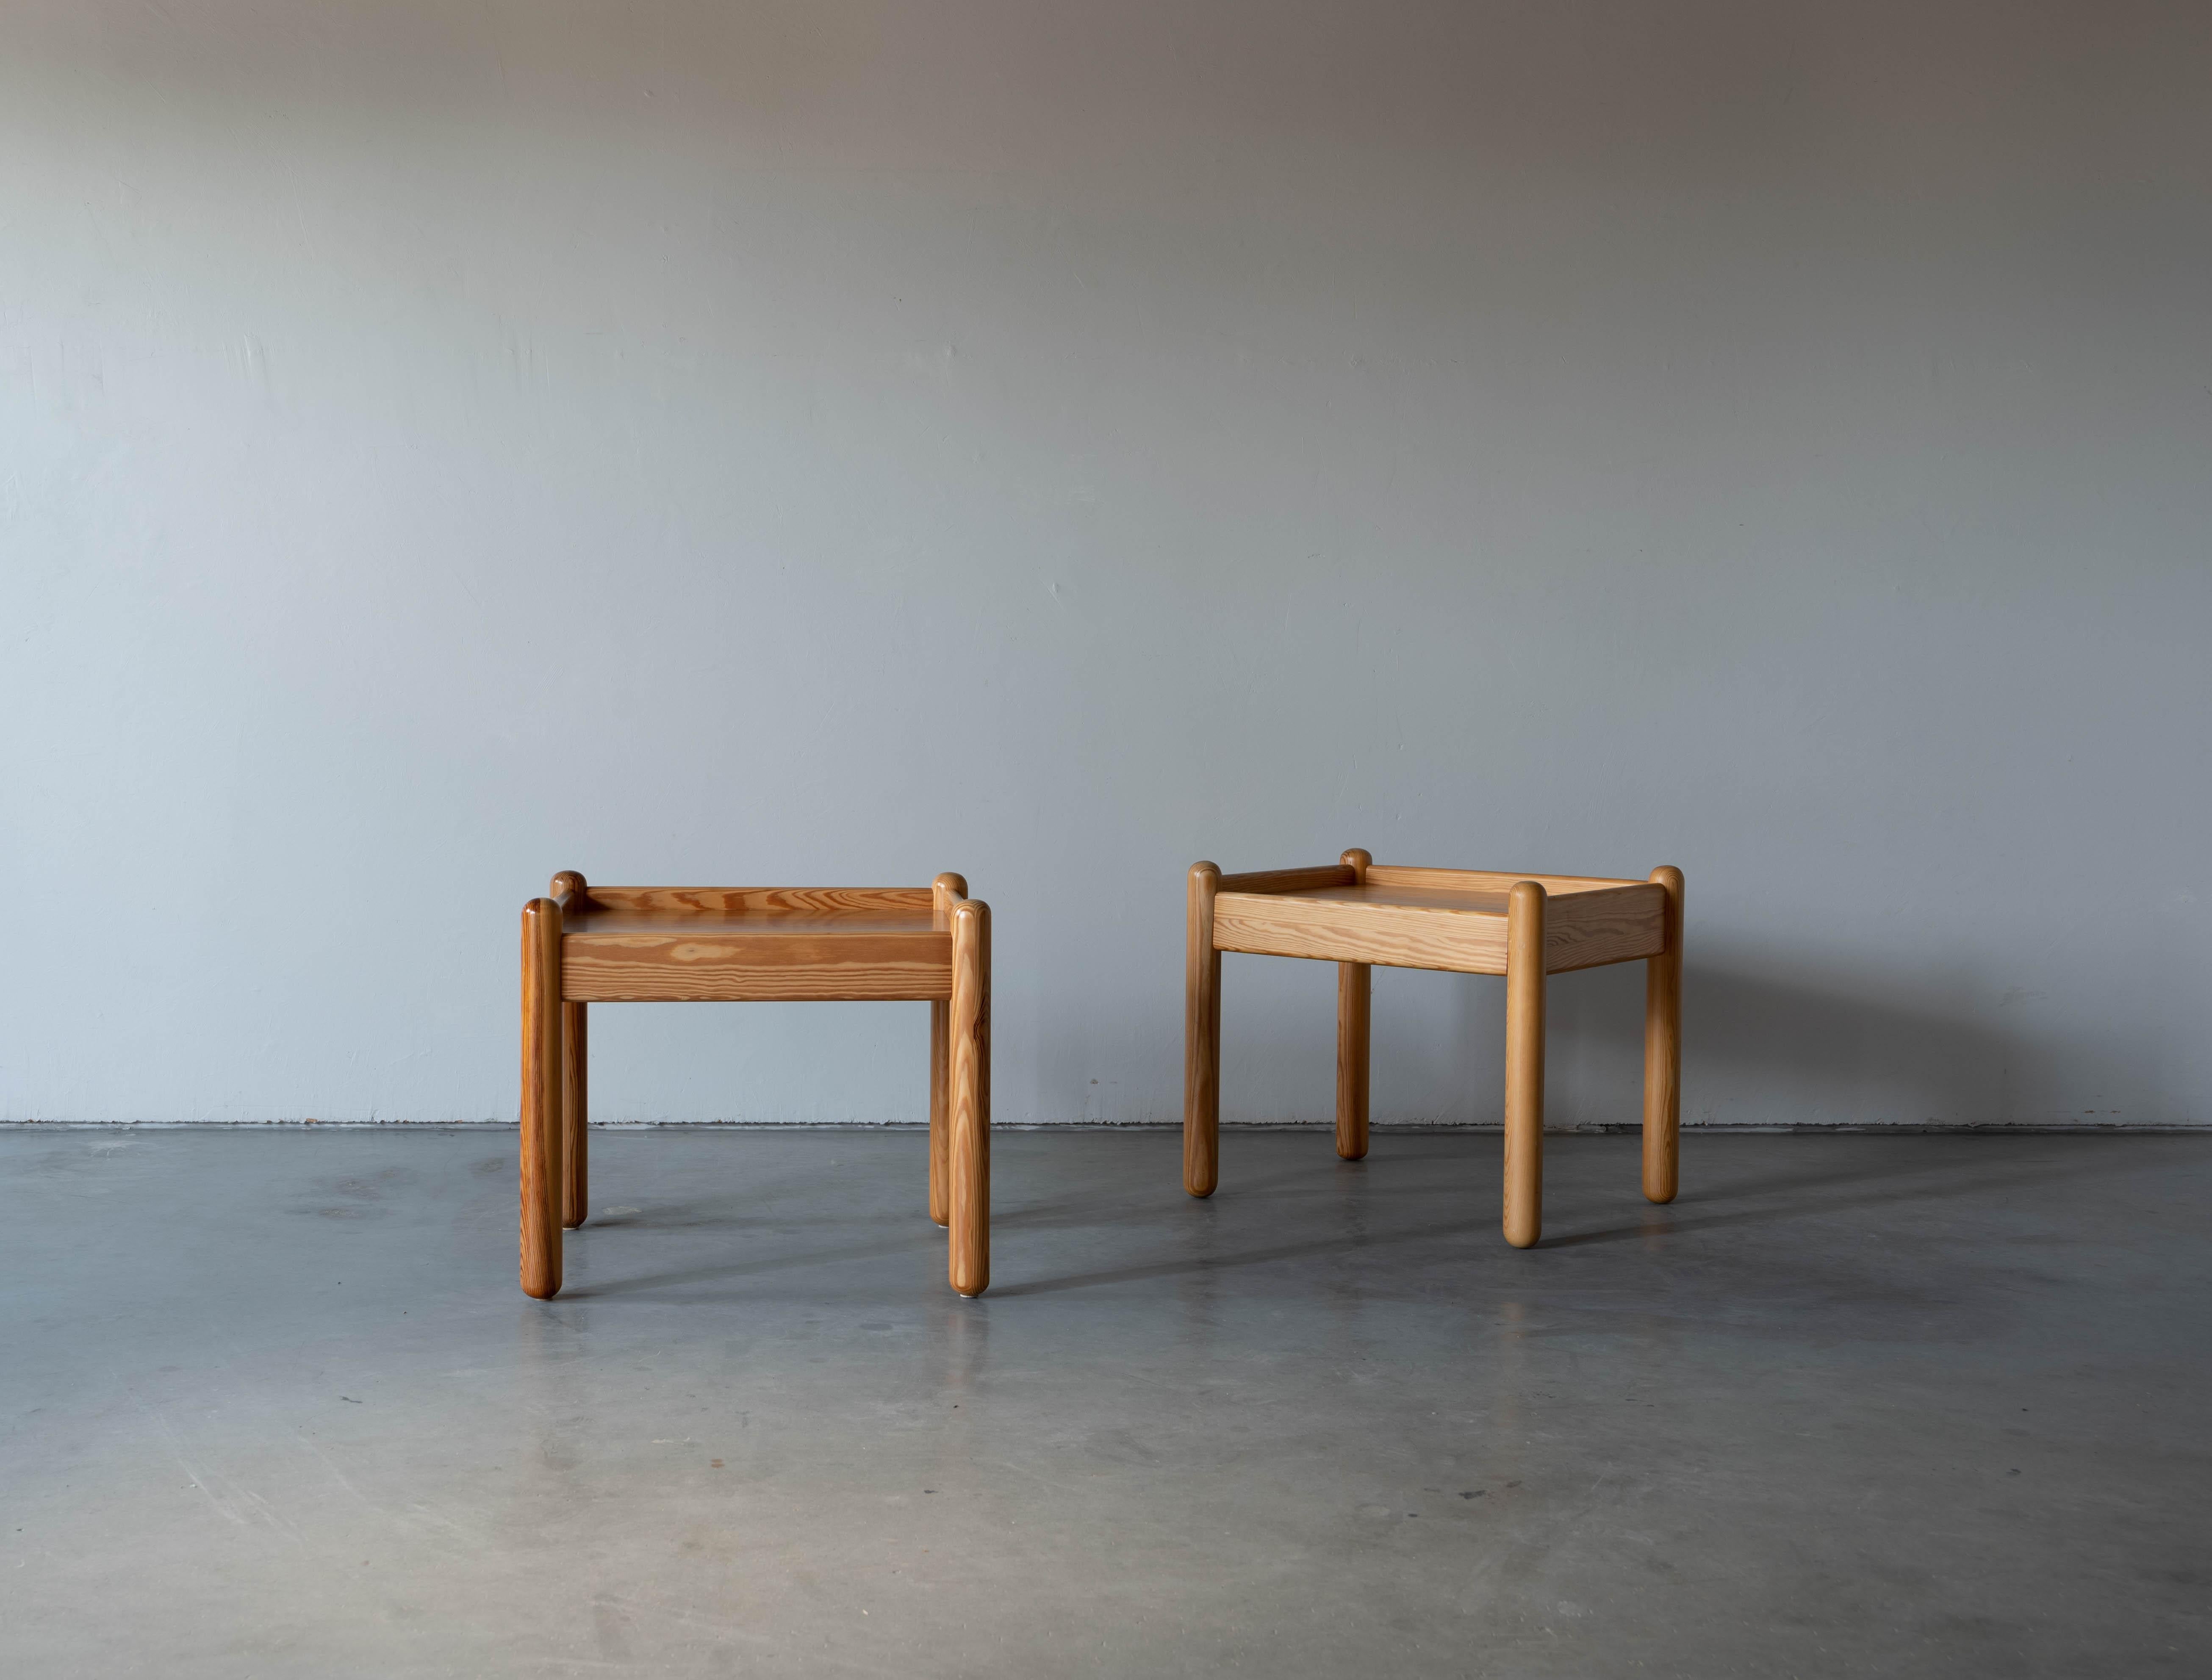 A set of side tables or bedside tables / nightstands. Designed and produced in Sweden, 1970s. In solid pine.

